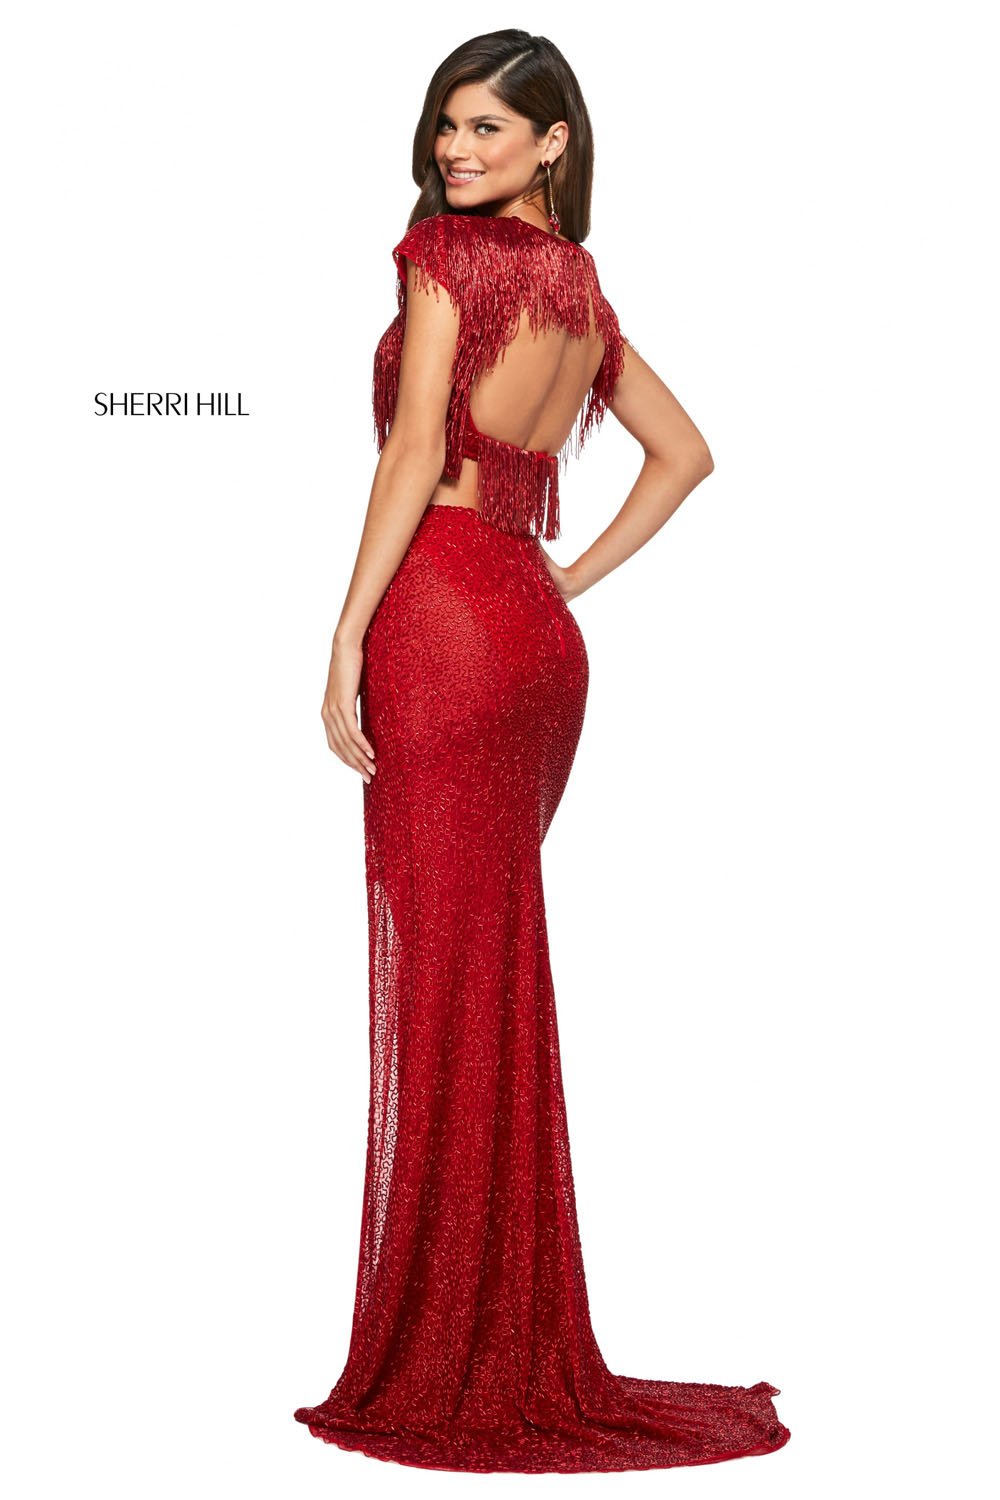 Sherri Hill 53458 dress images in these colors: Red, Black Multi, Black, Nude Multi, Gold.